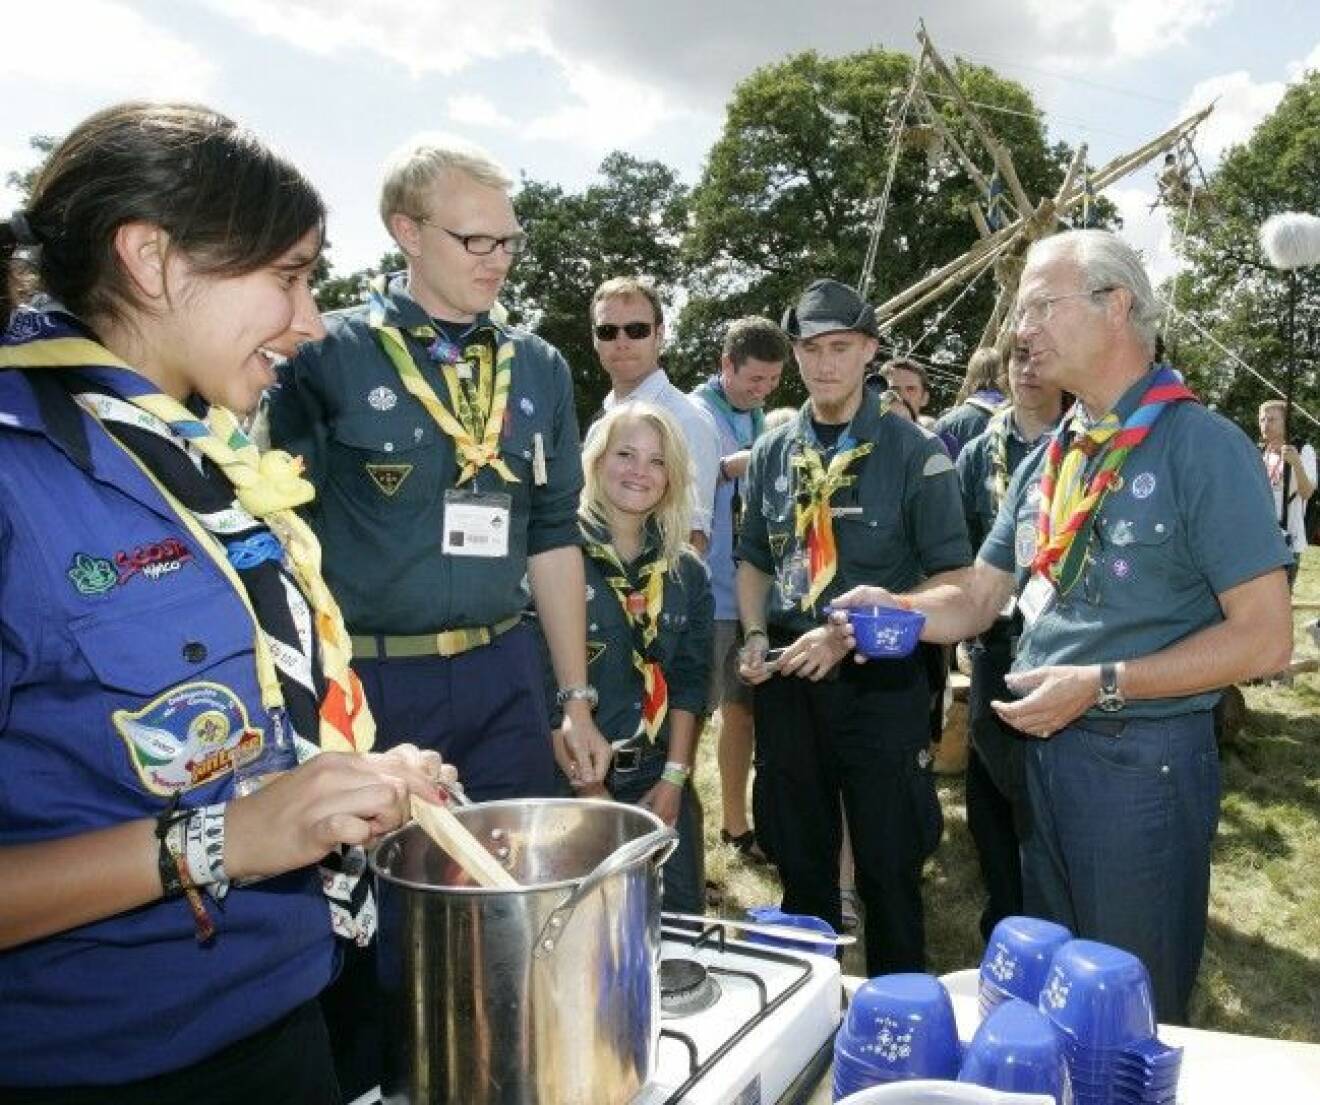 CHELMSFORD-ESSEX, 31.07.2007. KING CARL GUSTAF OF SWEDEN VISITS THE WORLD SCOUT JAMBOREE AND GETS TO MEET SCOUTS FROM SWEDEN, JAPAN, SOUTH AFIRCA AND MORE AS HE TOURS THE SITE. PHOTO: KELVIN BRUCE DISWTRIBUTED BY nunnsyndication. Code: 4008 COPYRIGHT STELLA PICTURES